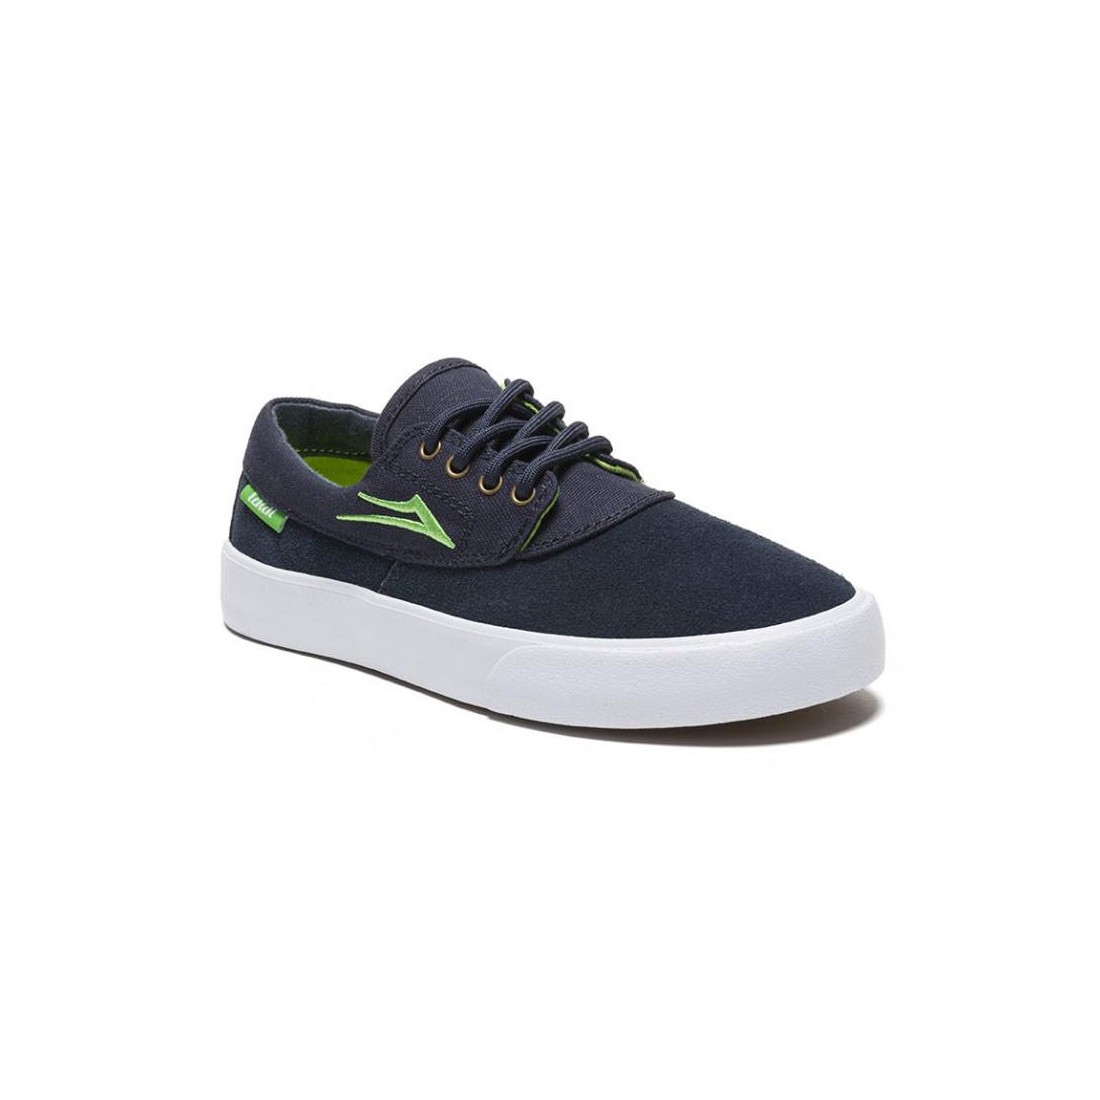 CAMBY KIDS navy suede